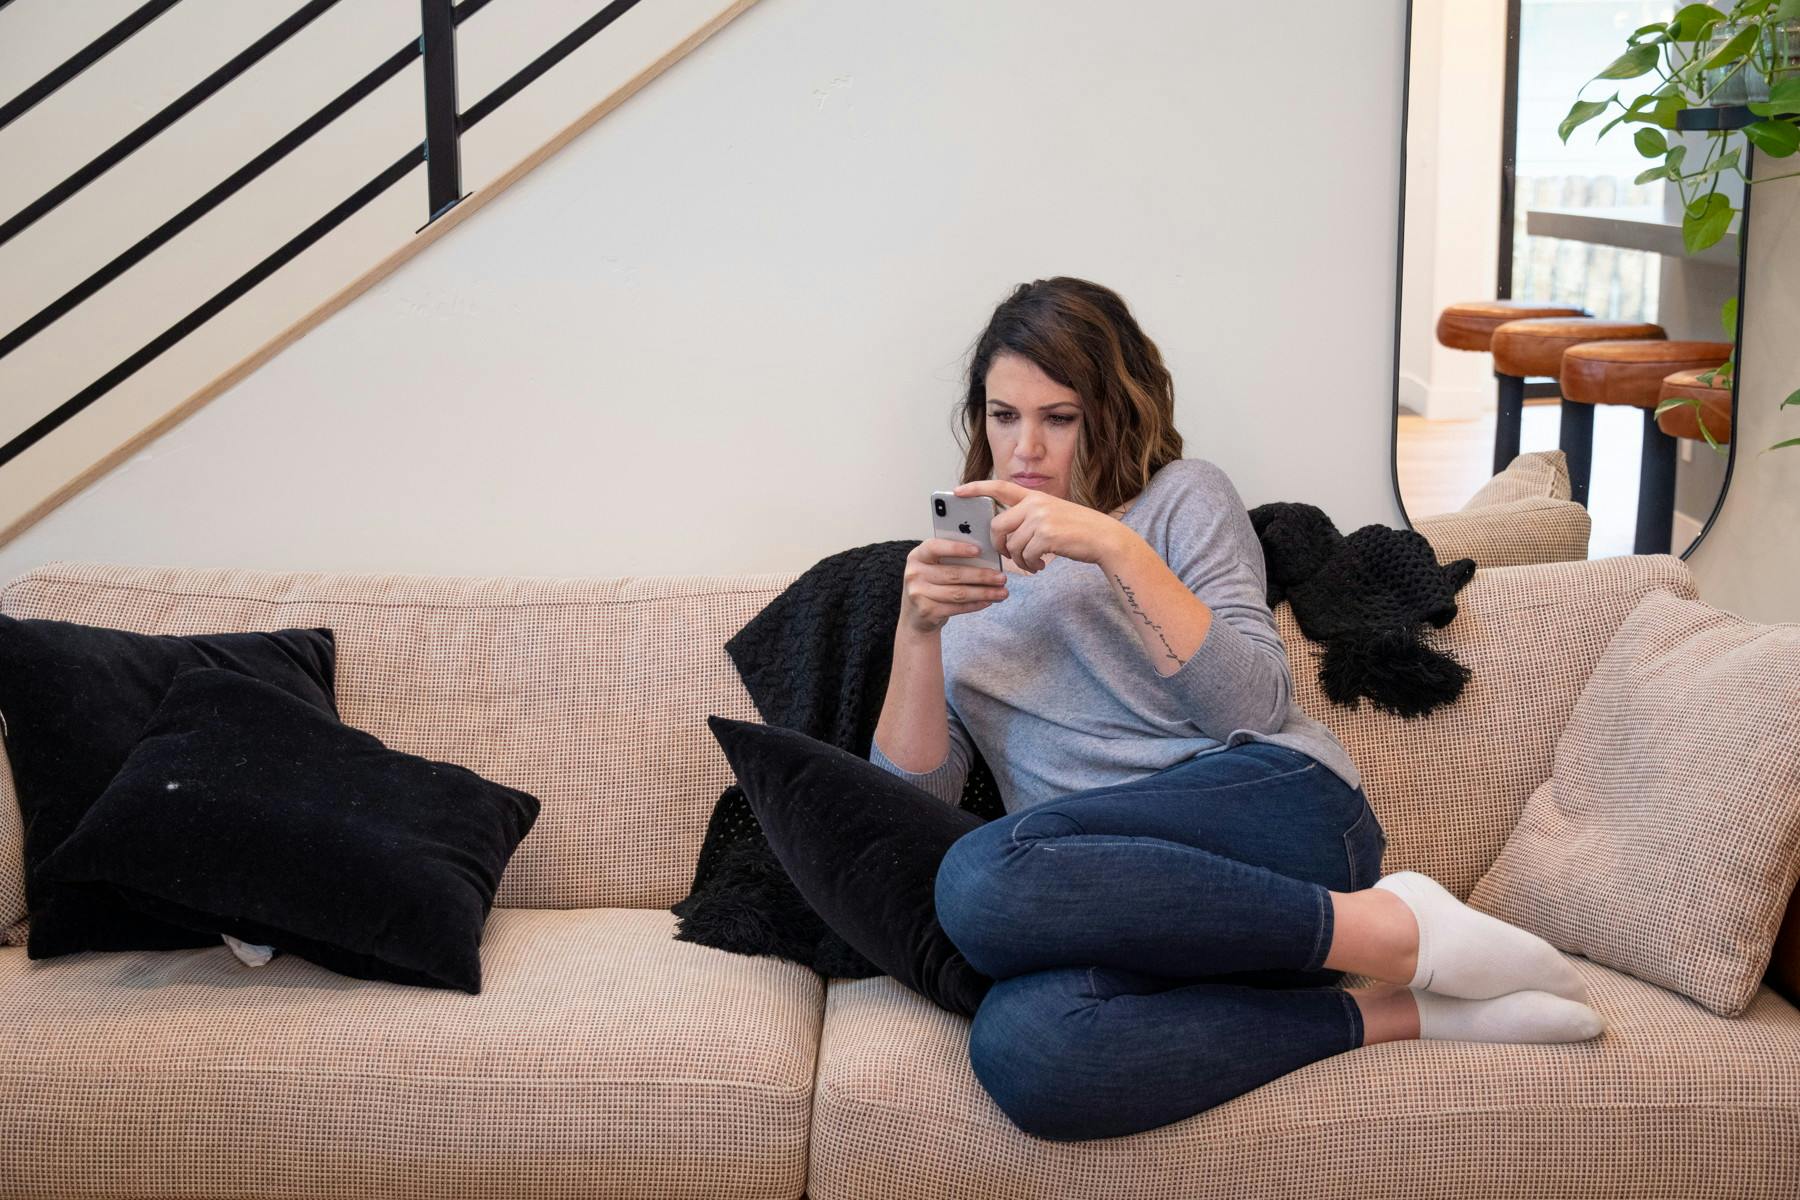 A woman looking at a cell phone while sitting on a sofa.